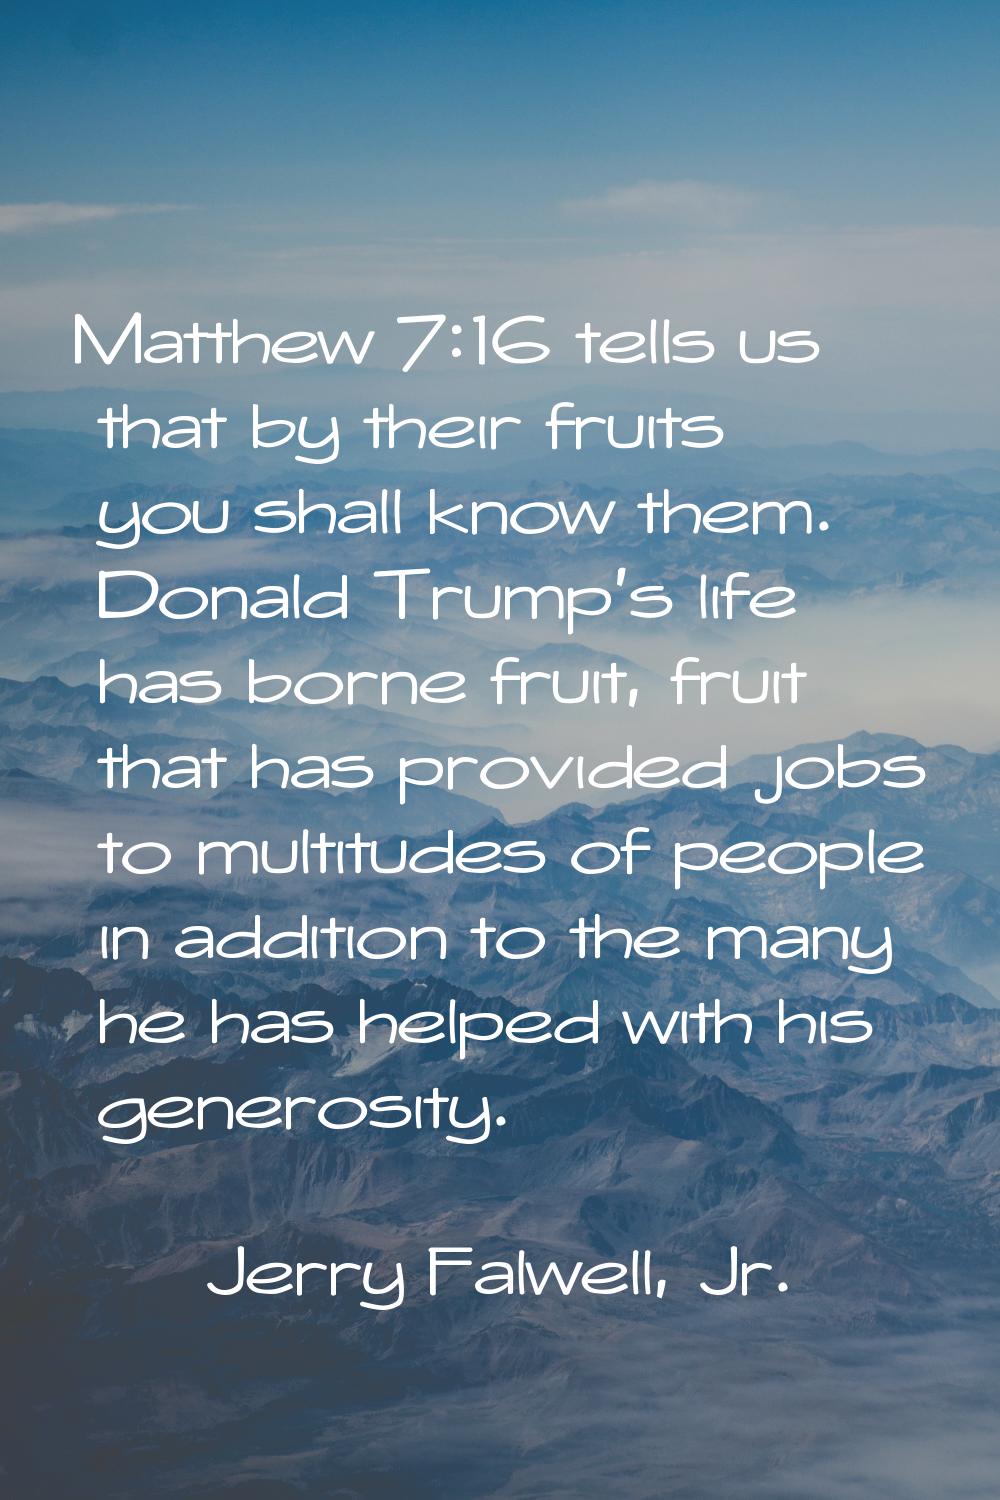 Matthew 7:16 tells us that by their fruits you shall know them. Donald Trump's life has borne fruit